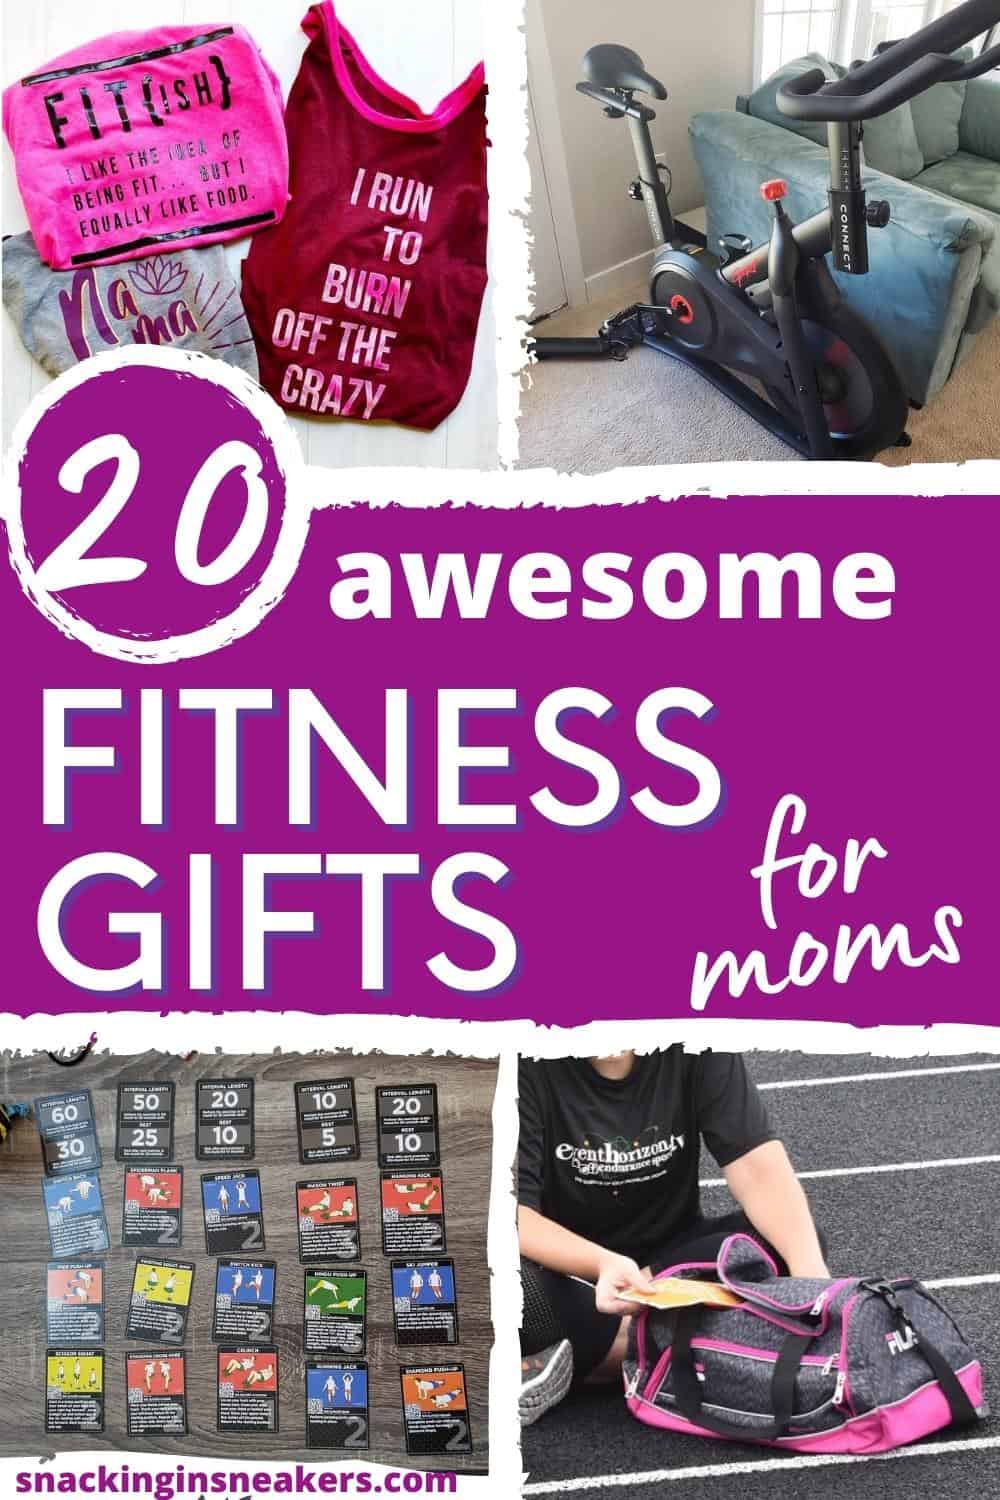 A collage of several fitness gifts for moms, including a duffel bag, an exercise game, a spin bike, and workout tanks.